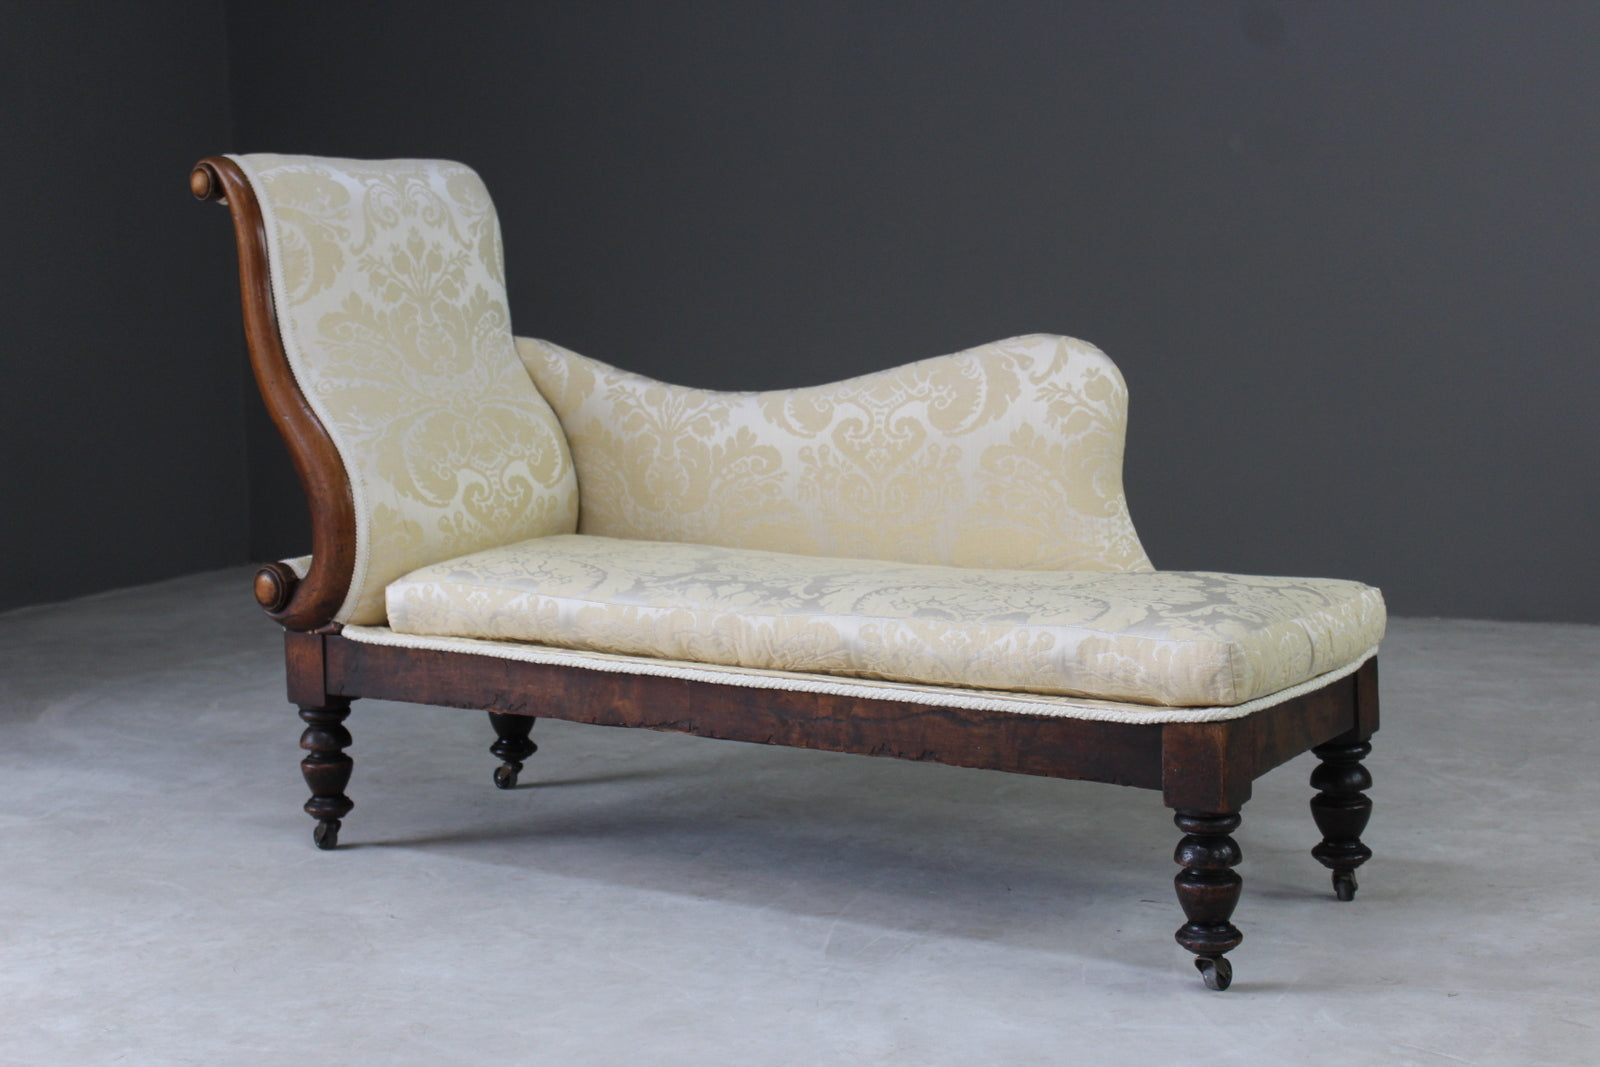 Antique Upholstered Chaise Longue - Kernow Furniture